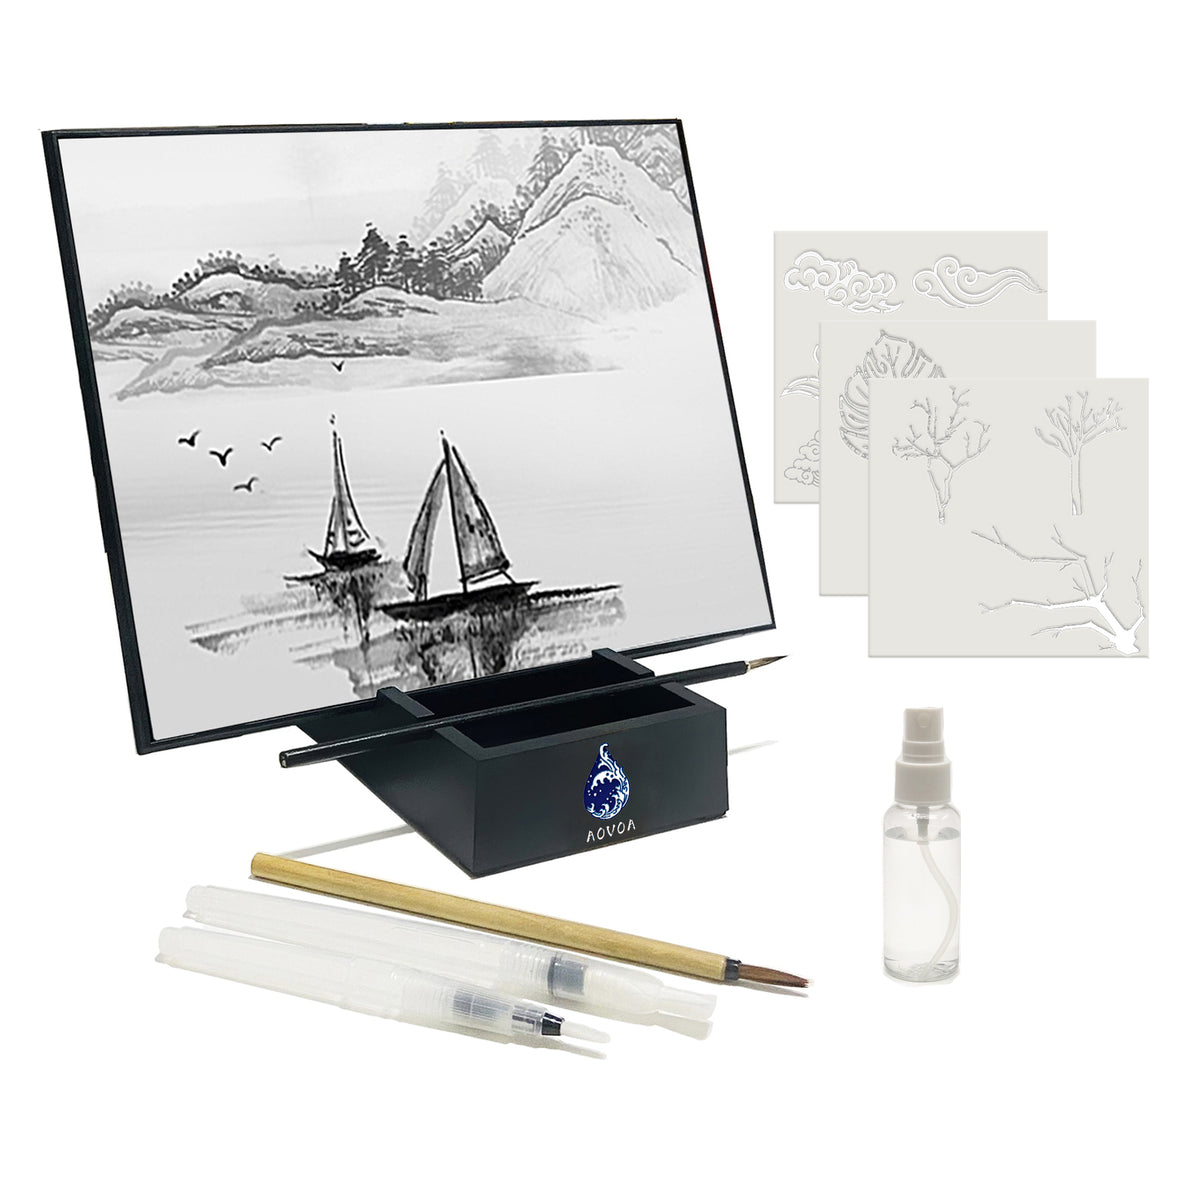 AOVOA Zen Meditation Board, Painting with Water for Relaxing, Mindfuln –  AovoA